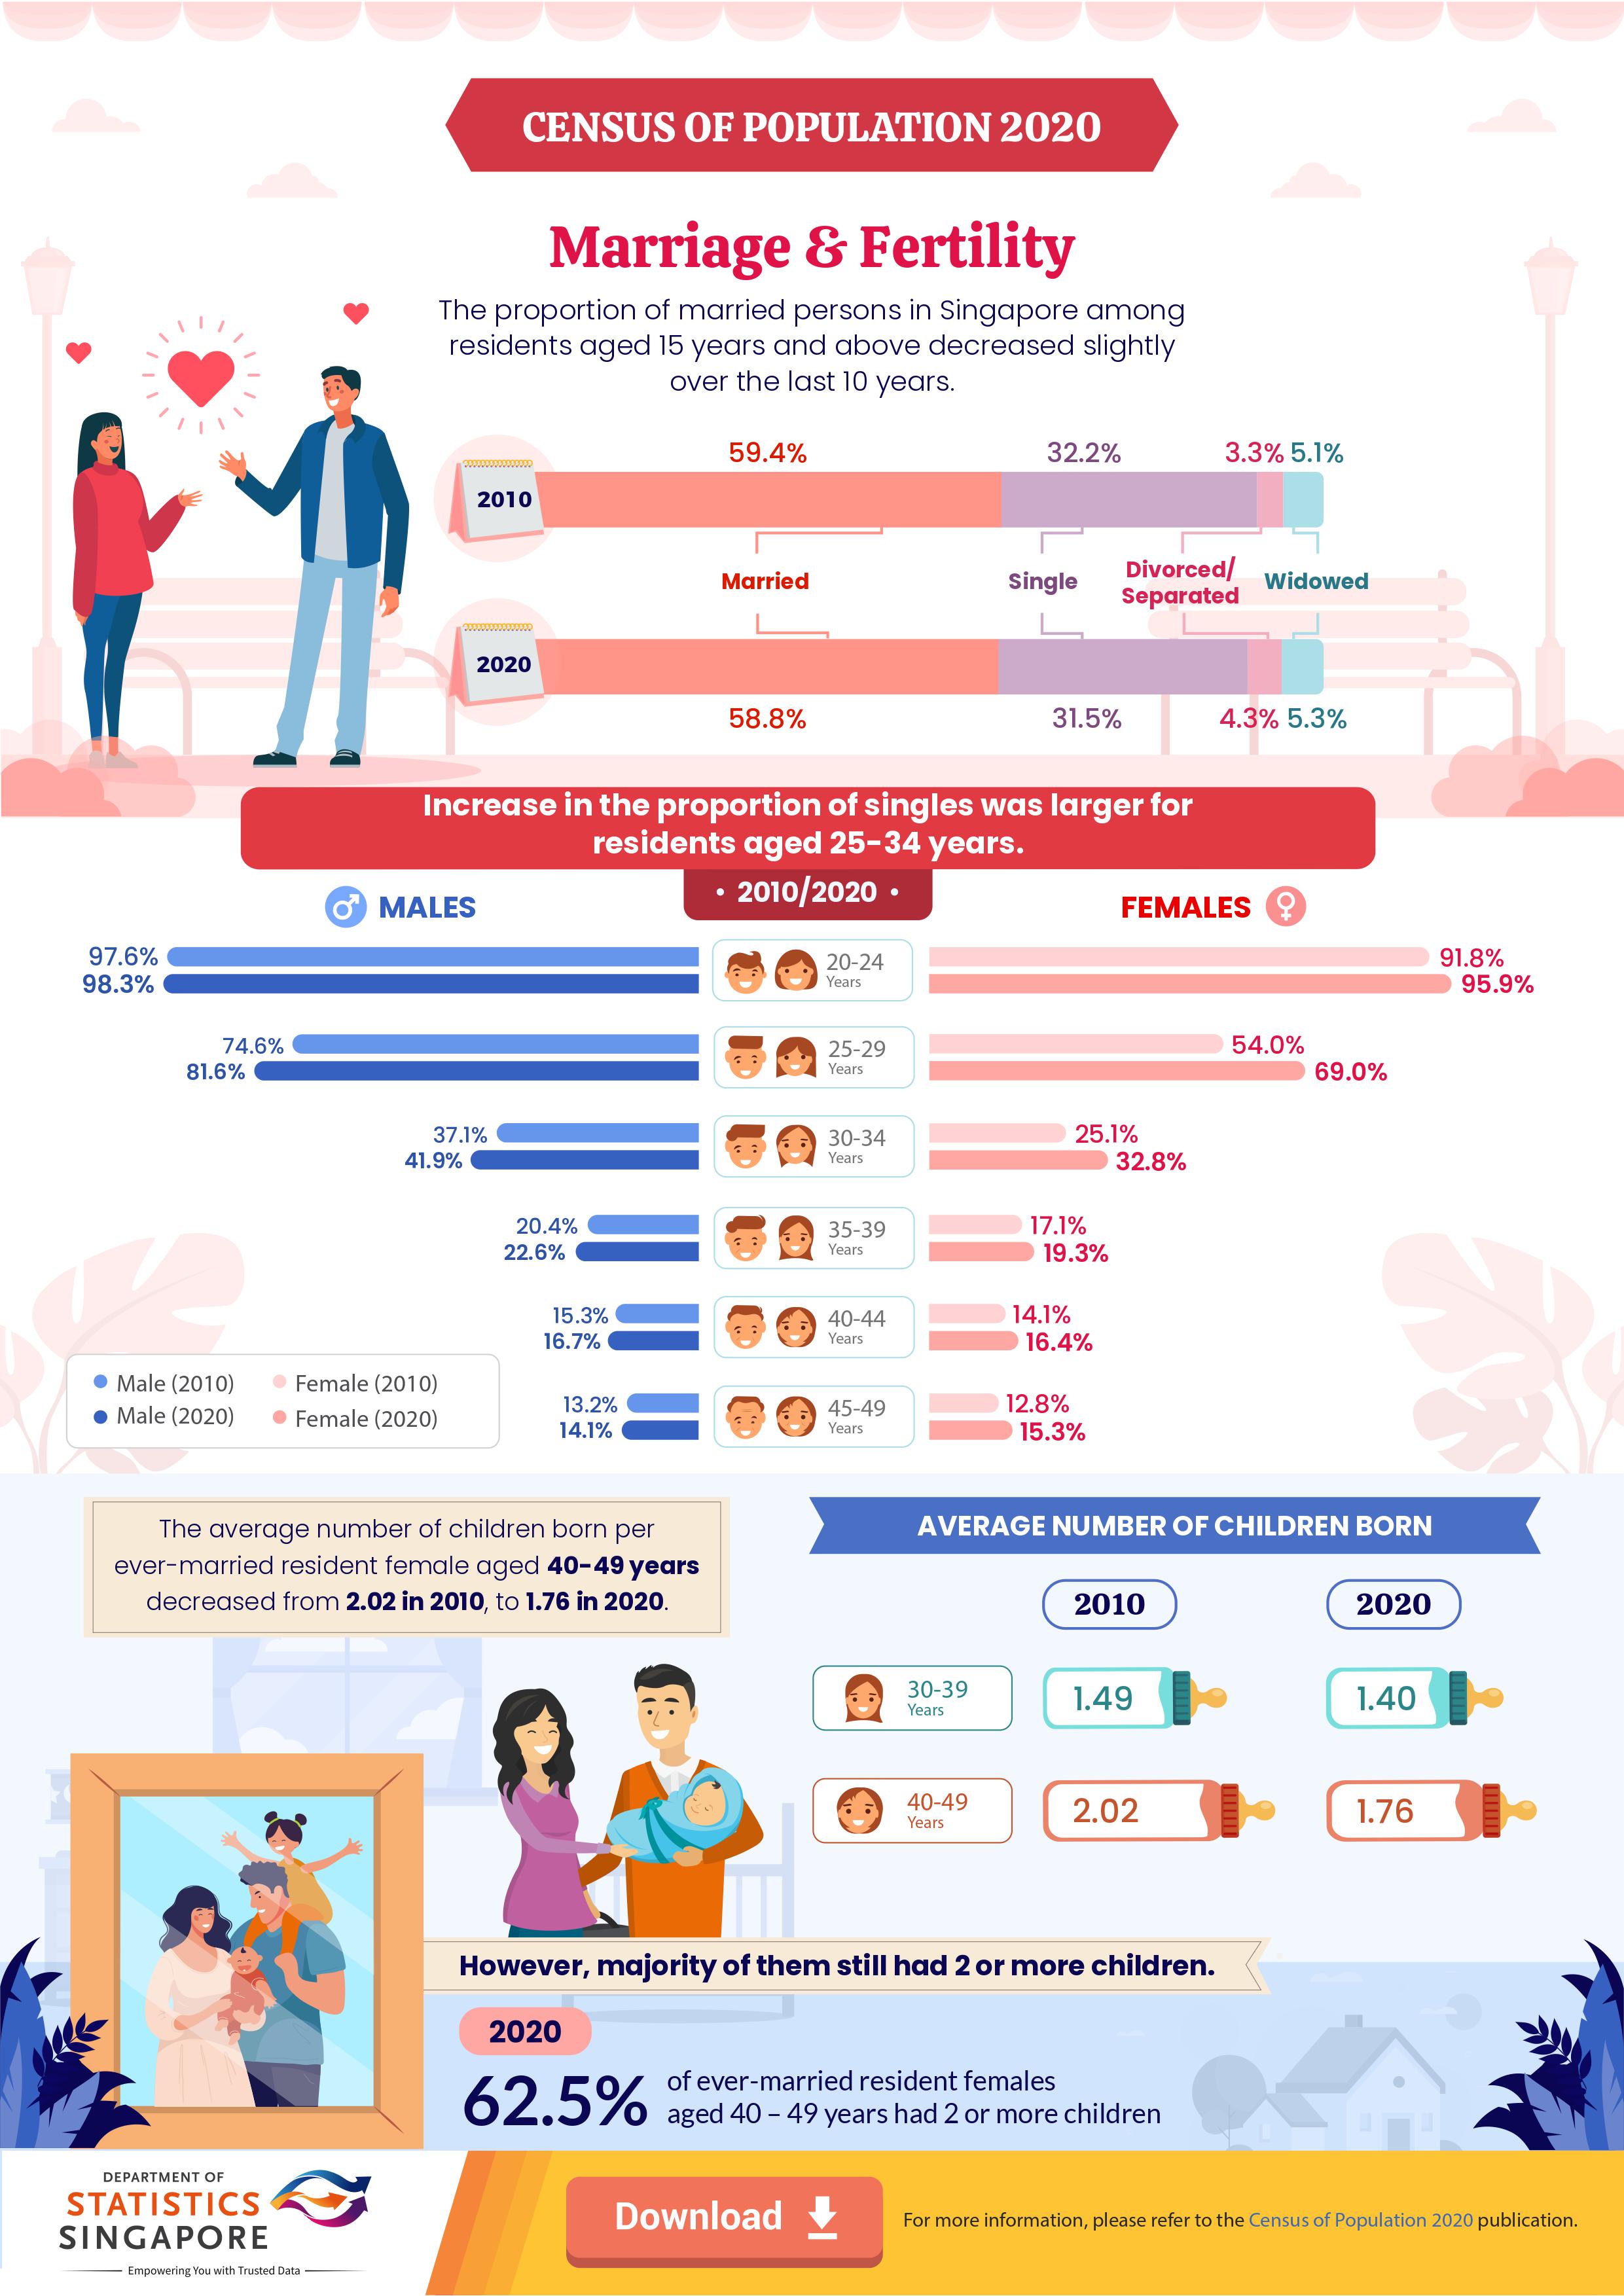 Census of Population 2020 - Marriage & Fertility